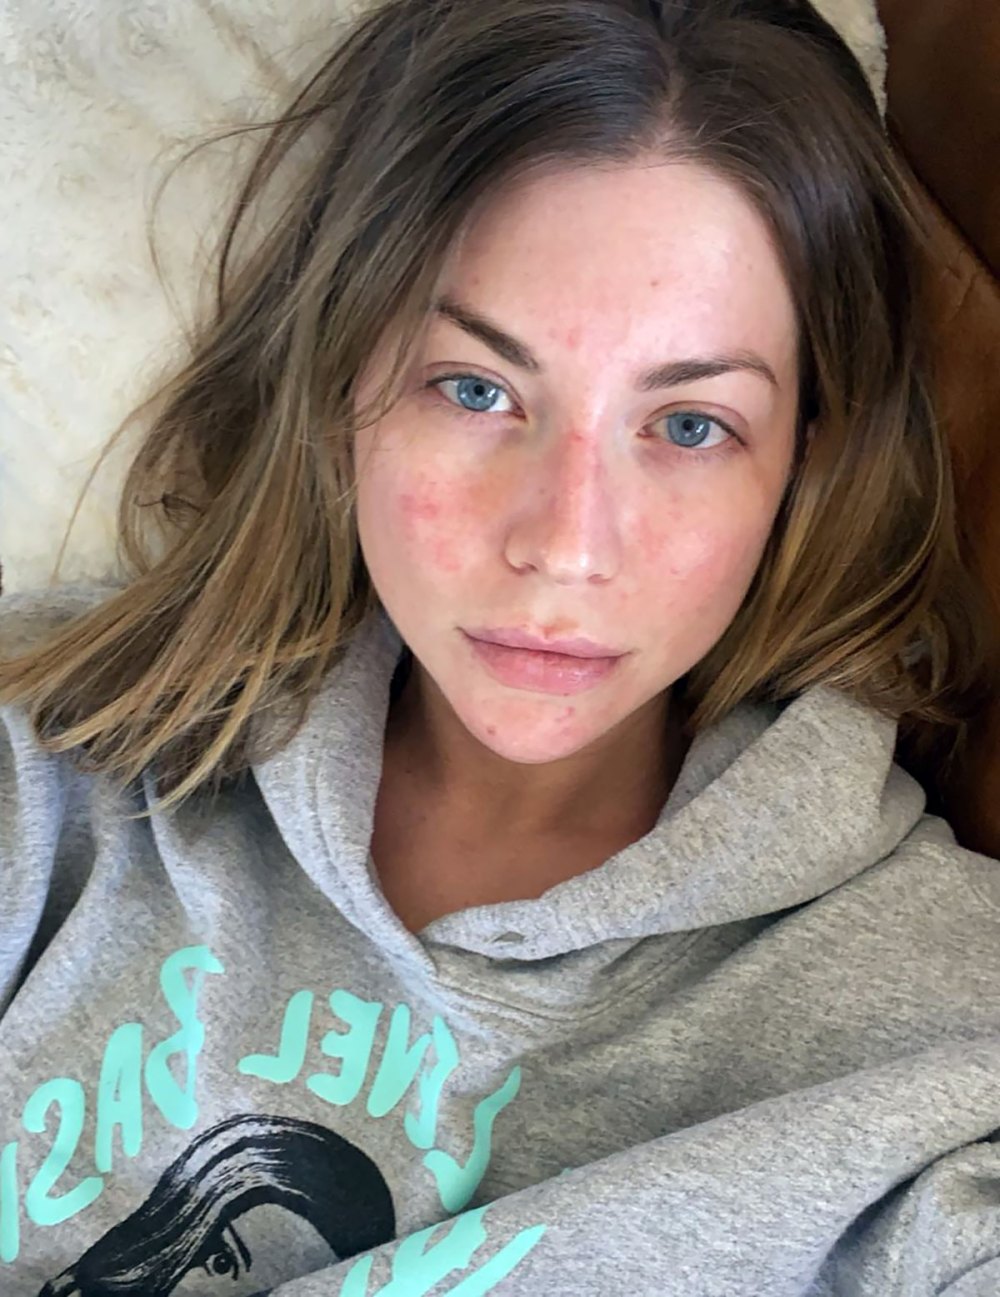 Stassi Schroeder Shows Psoriasis and Roots in Rare Makeup-Free Selfie